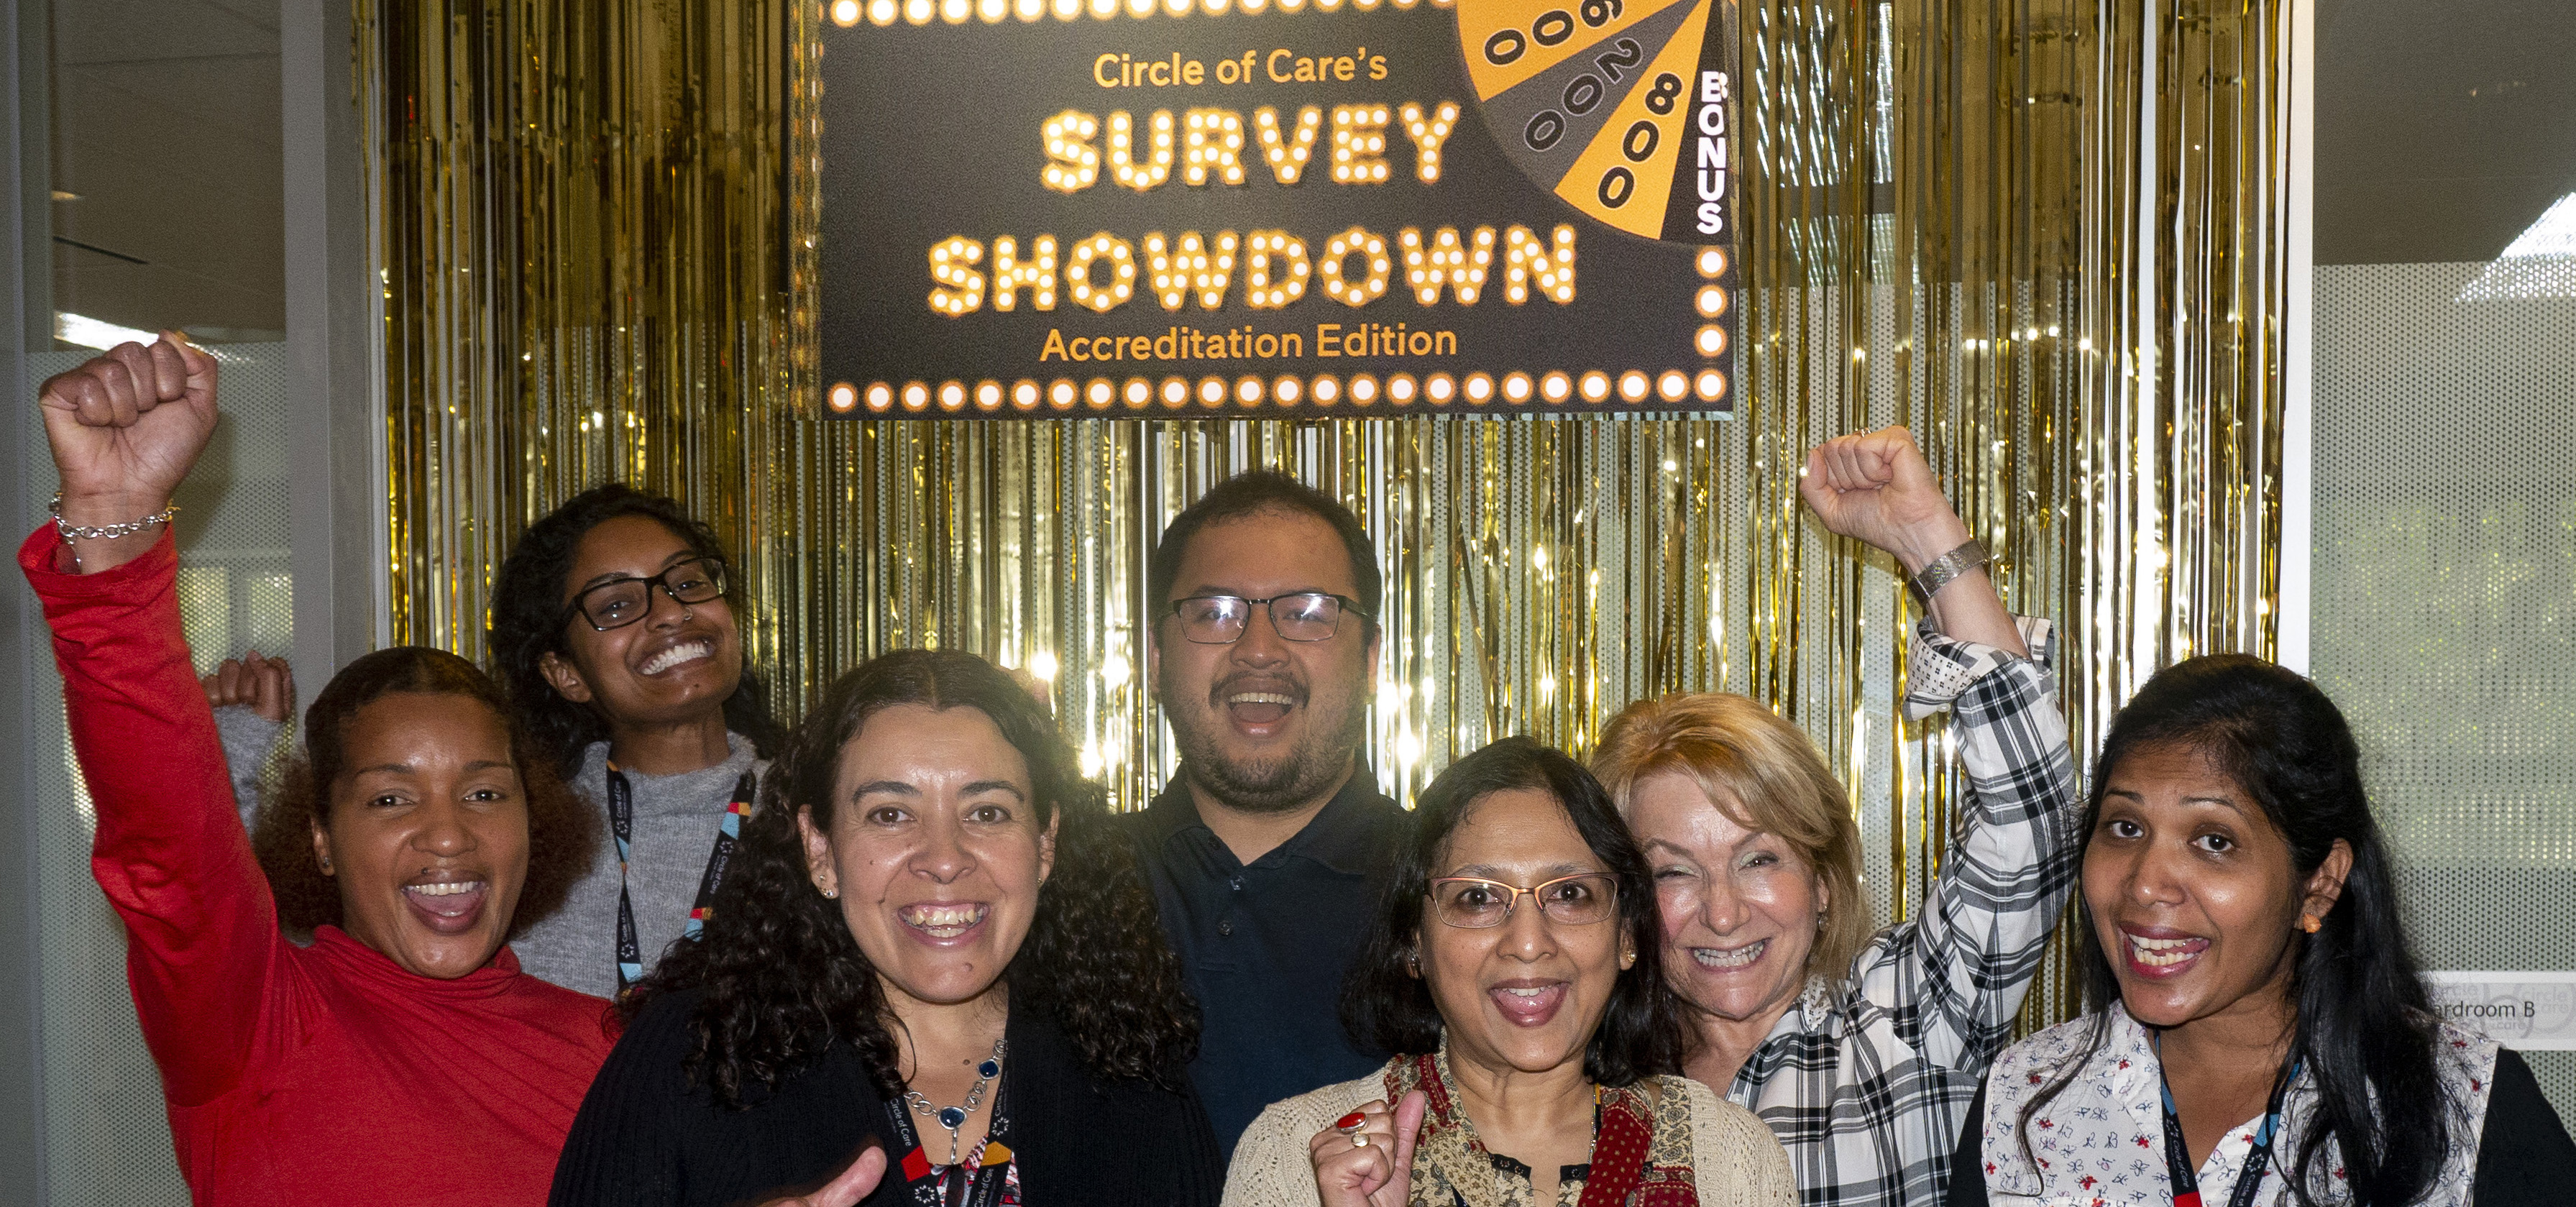 Circle of care employees at survey showdown event